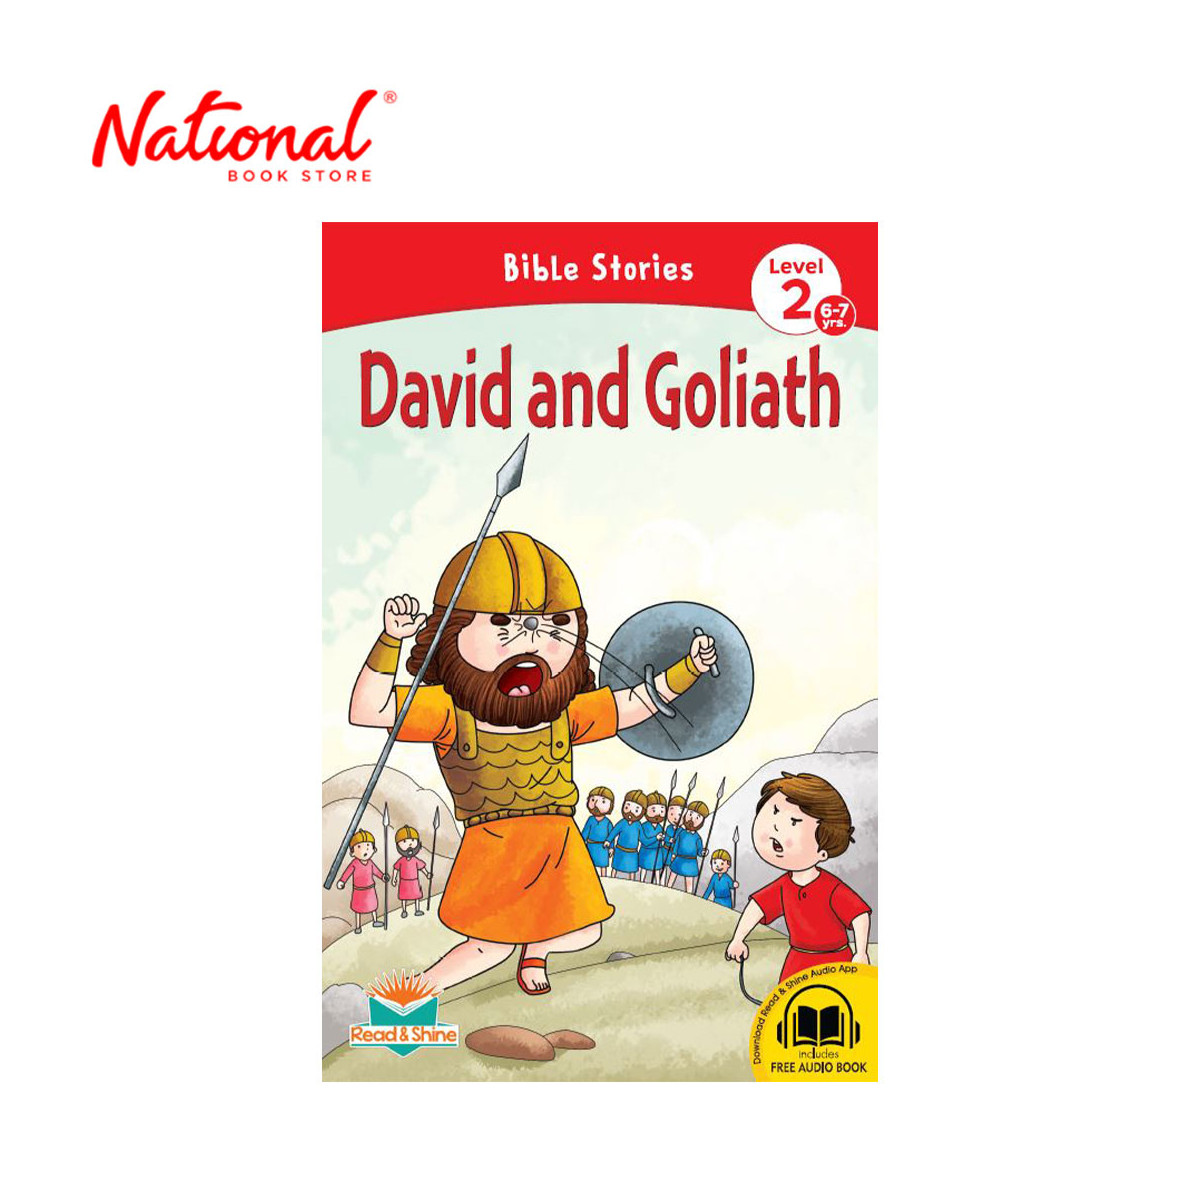 David And Goliath Level 2 - Trade Paperback - Bible Stories for Kids